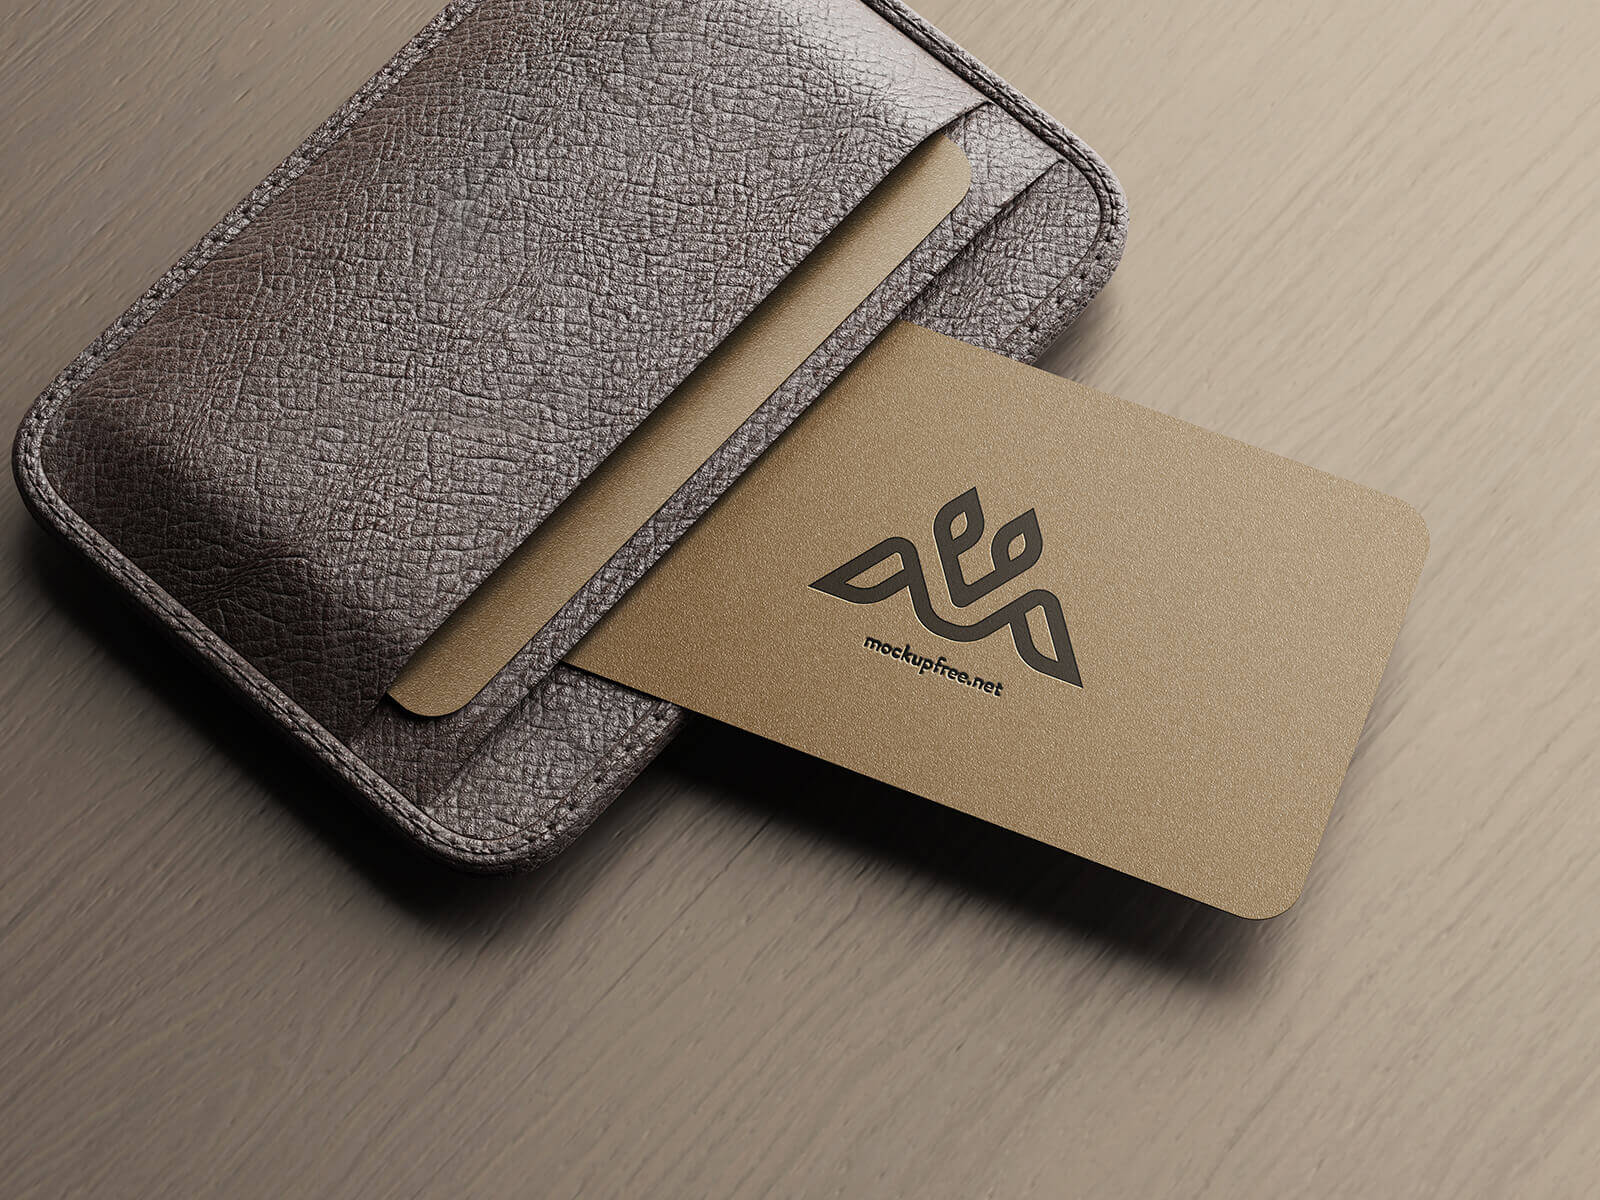 Stitched Leather Card Wallet Mockup 